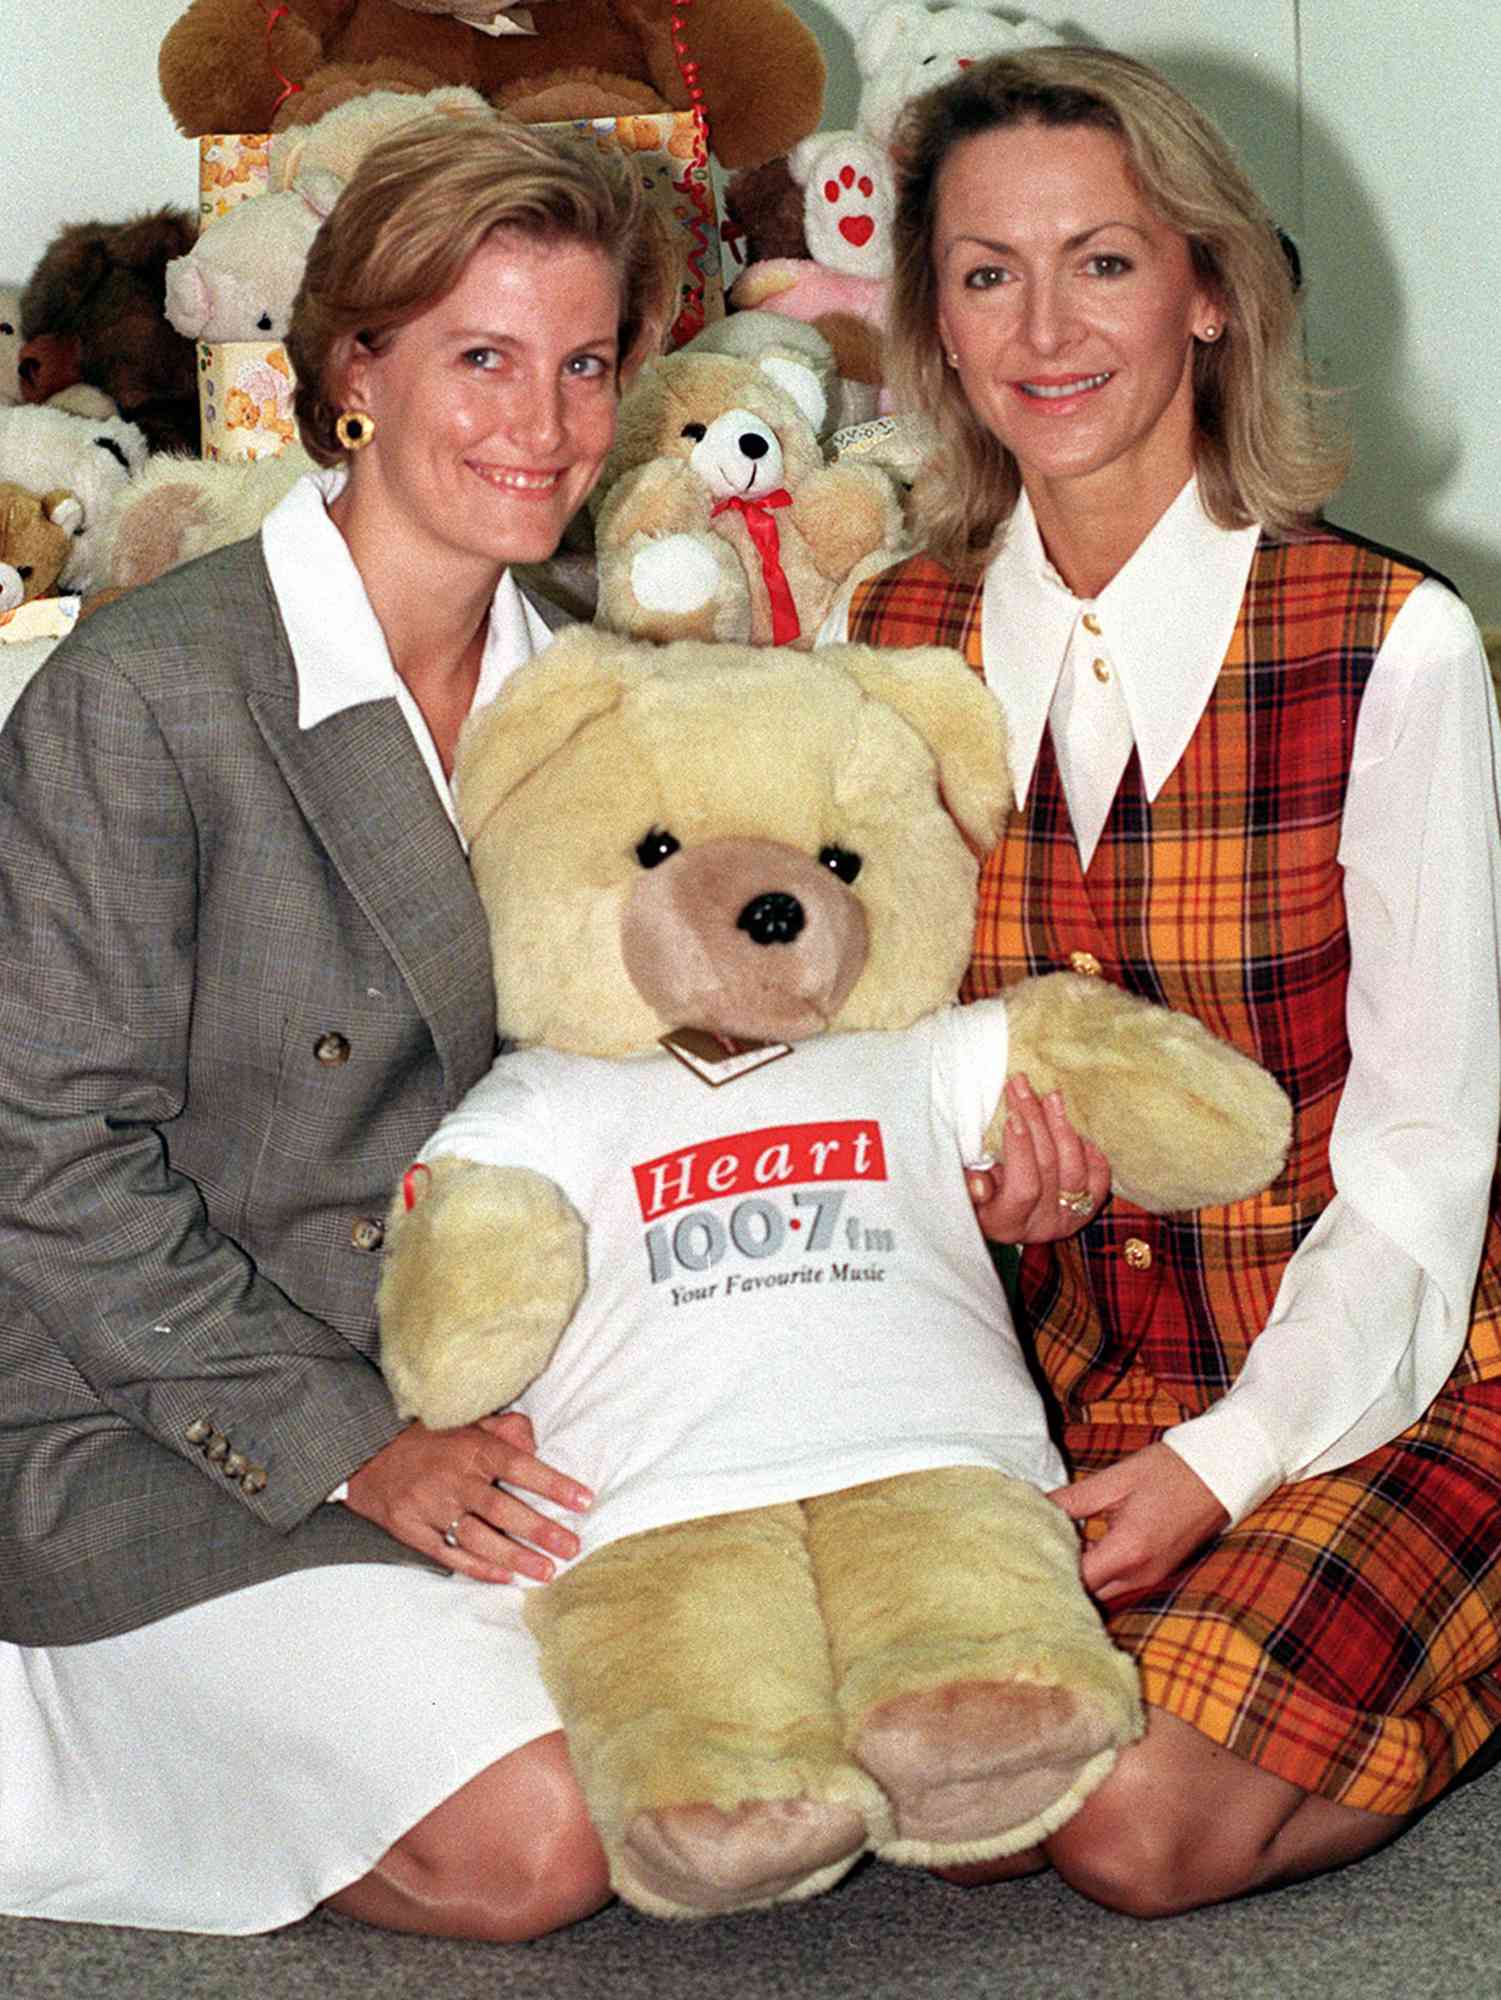 SOPHIE RHYS-JONES AND LADY COBHAM (RIGHT) LAUNCH THE FIRST STEPS APPEAL CHARITY FOR TODDLERS IN BIRMINGHAM